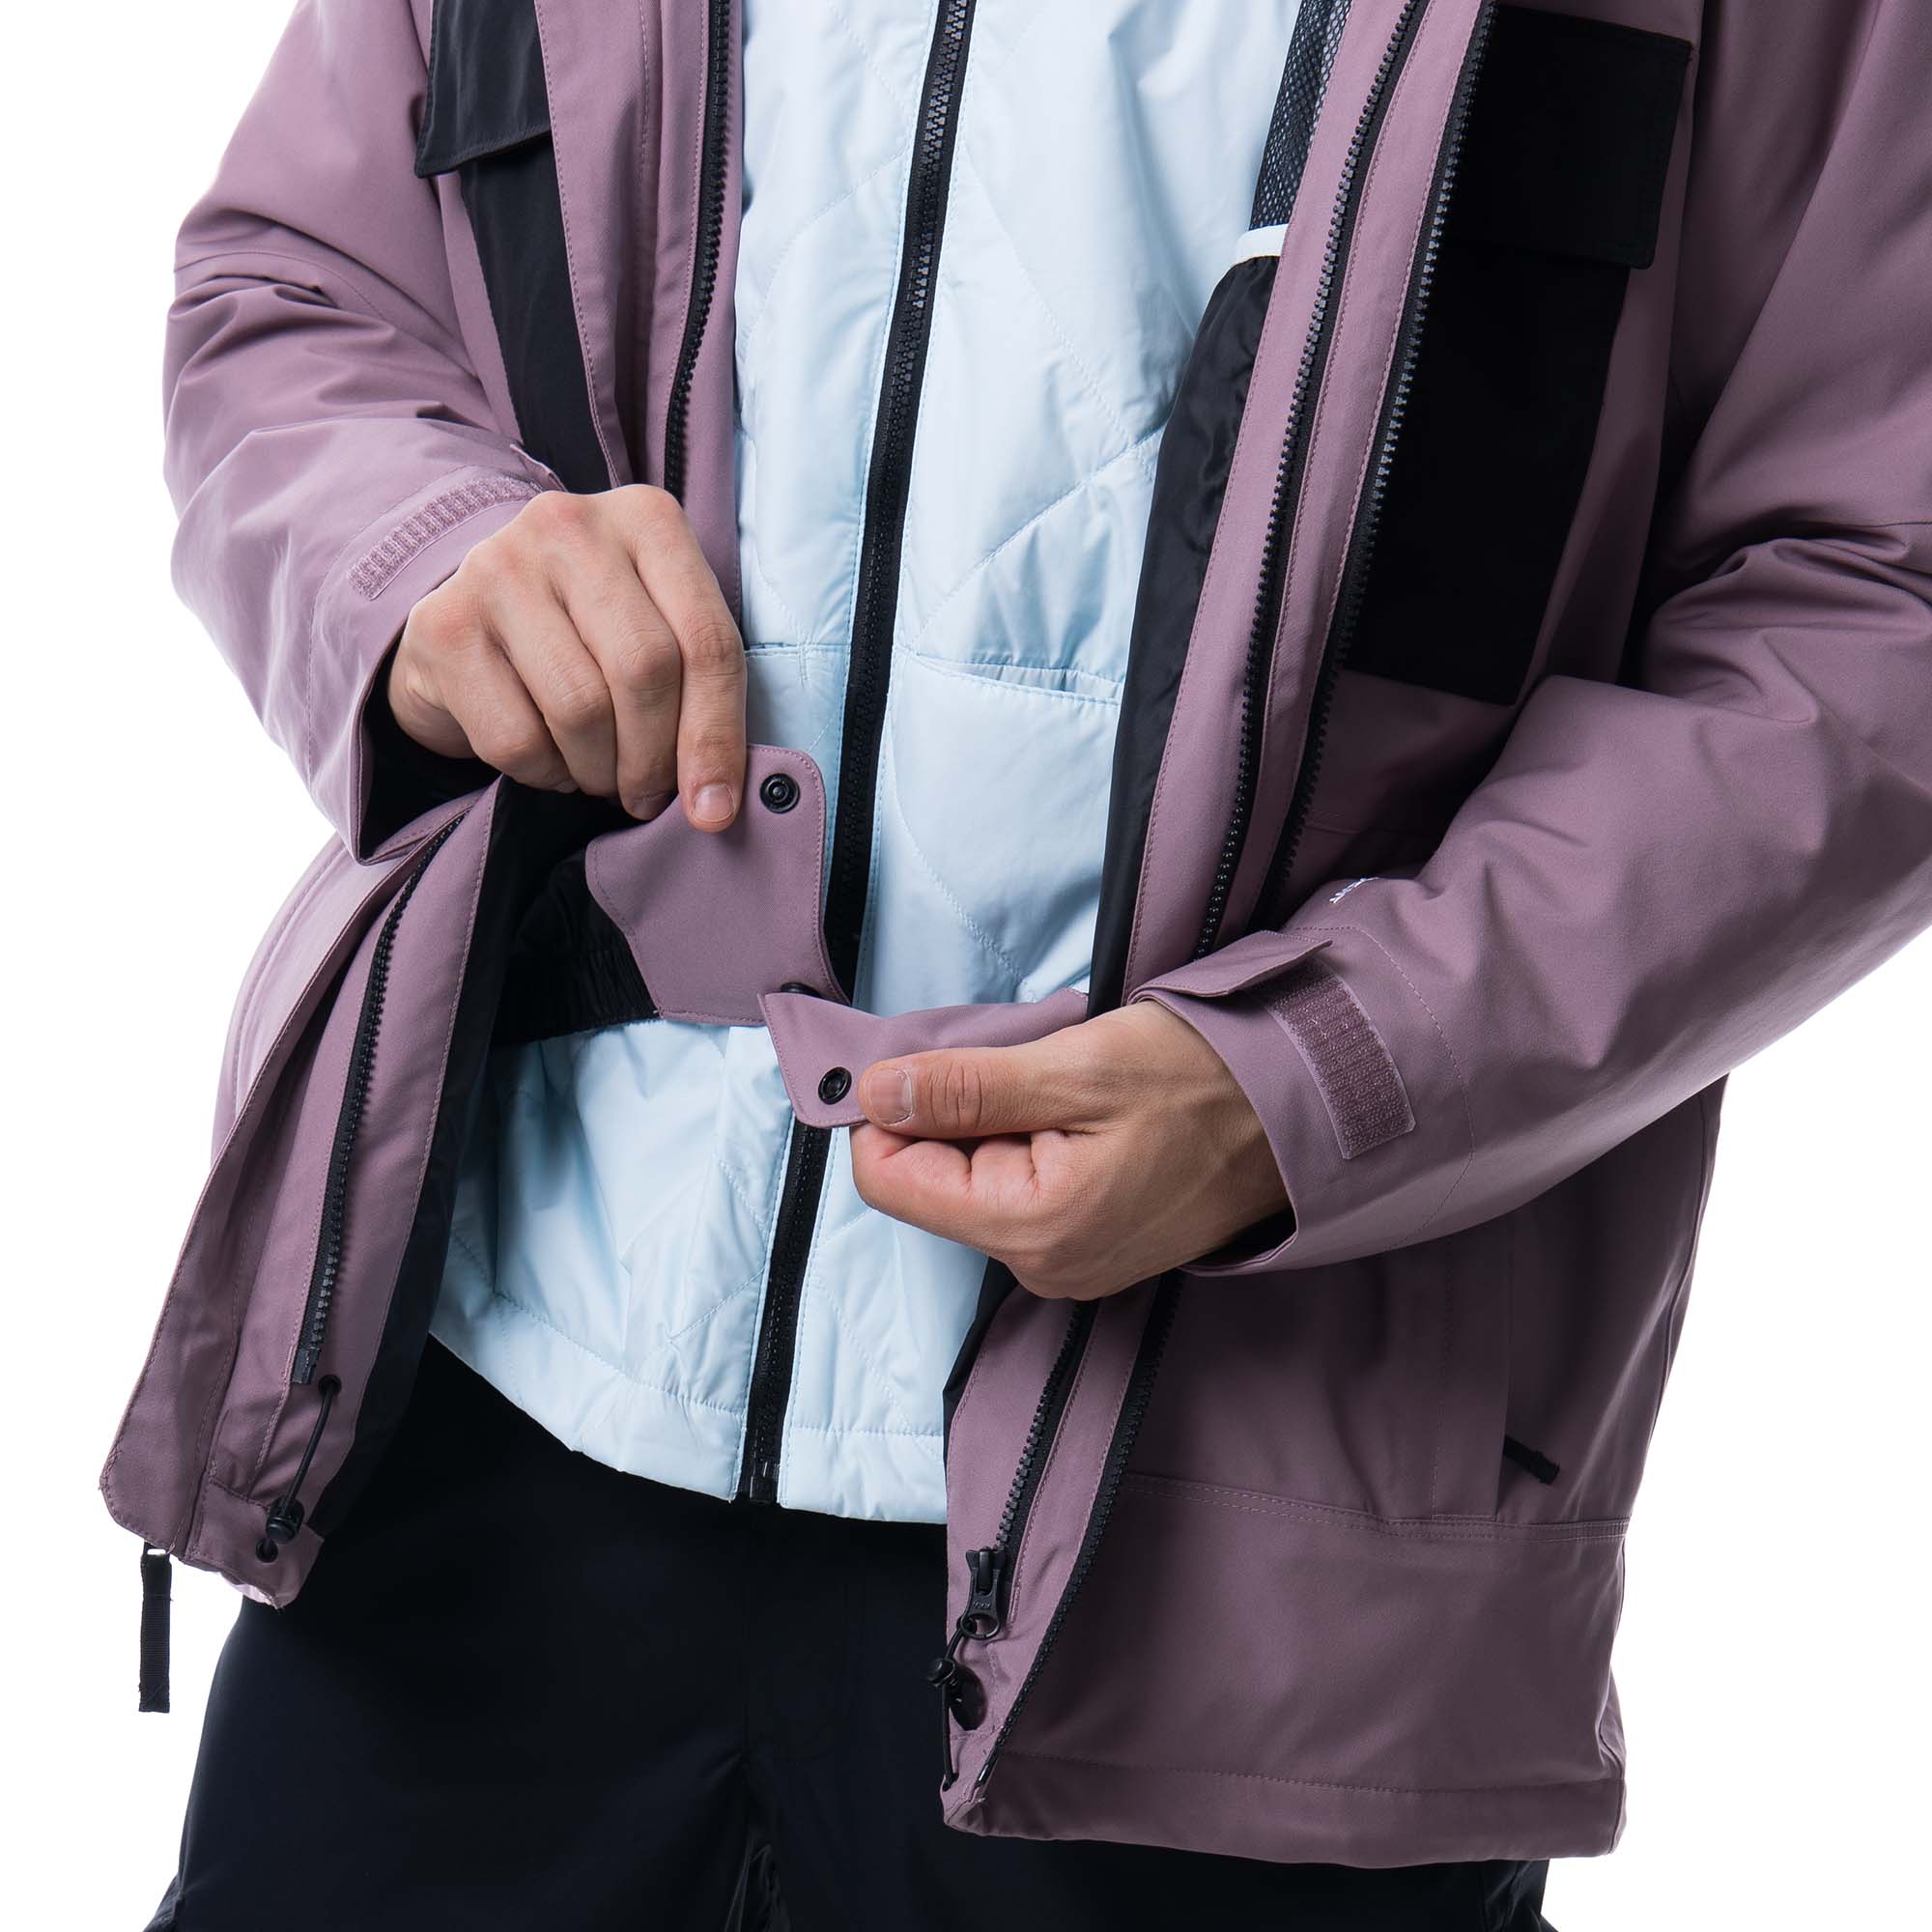 The North Face Fourbarrel Triclimate Ski Jacket